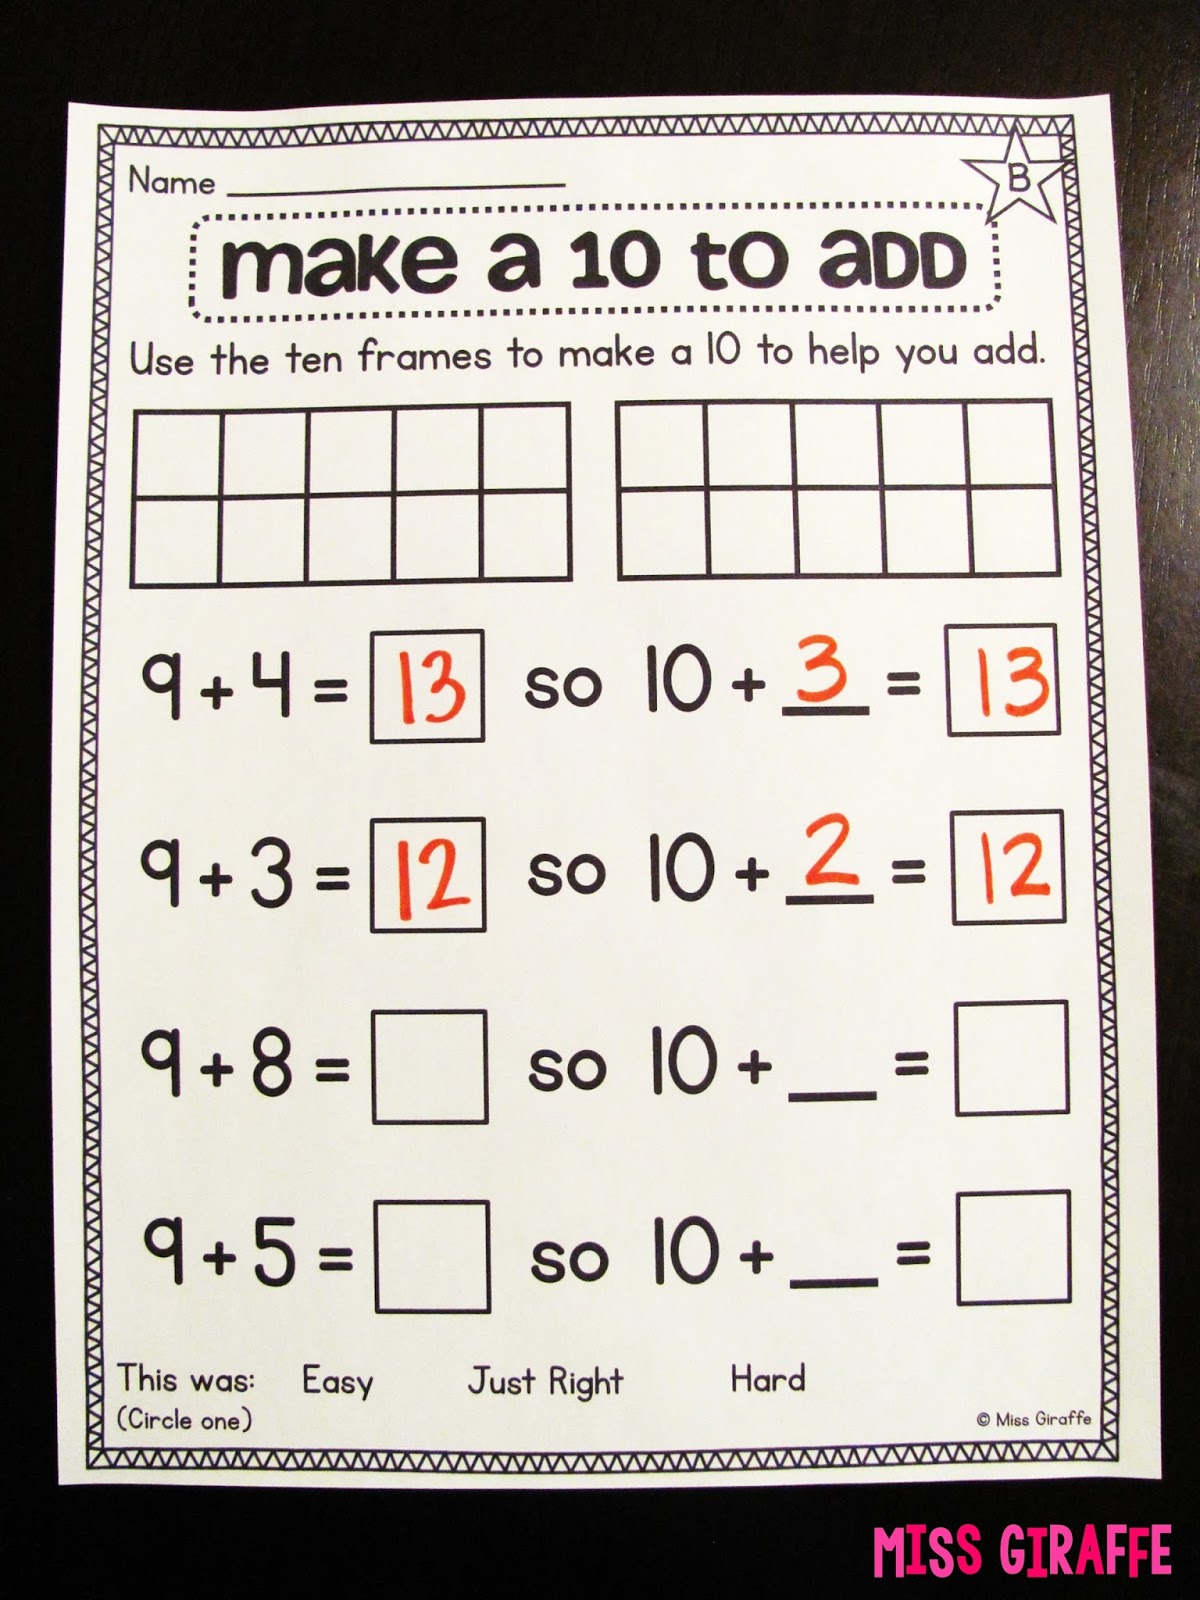 Make A 10 To Add Worksheets